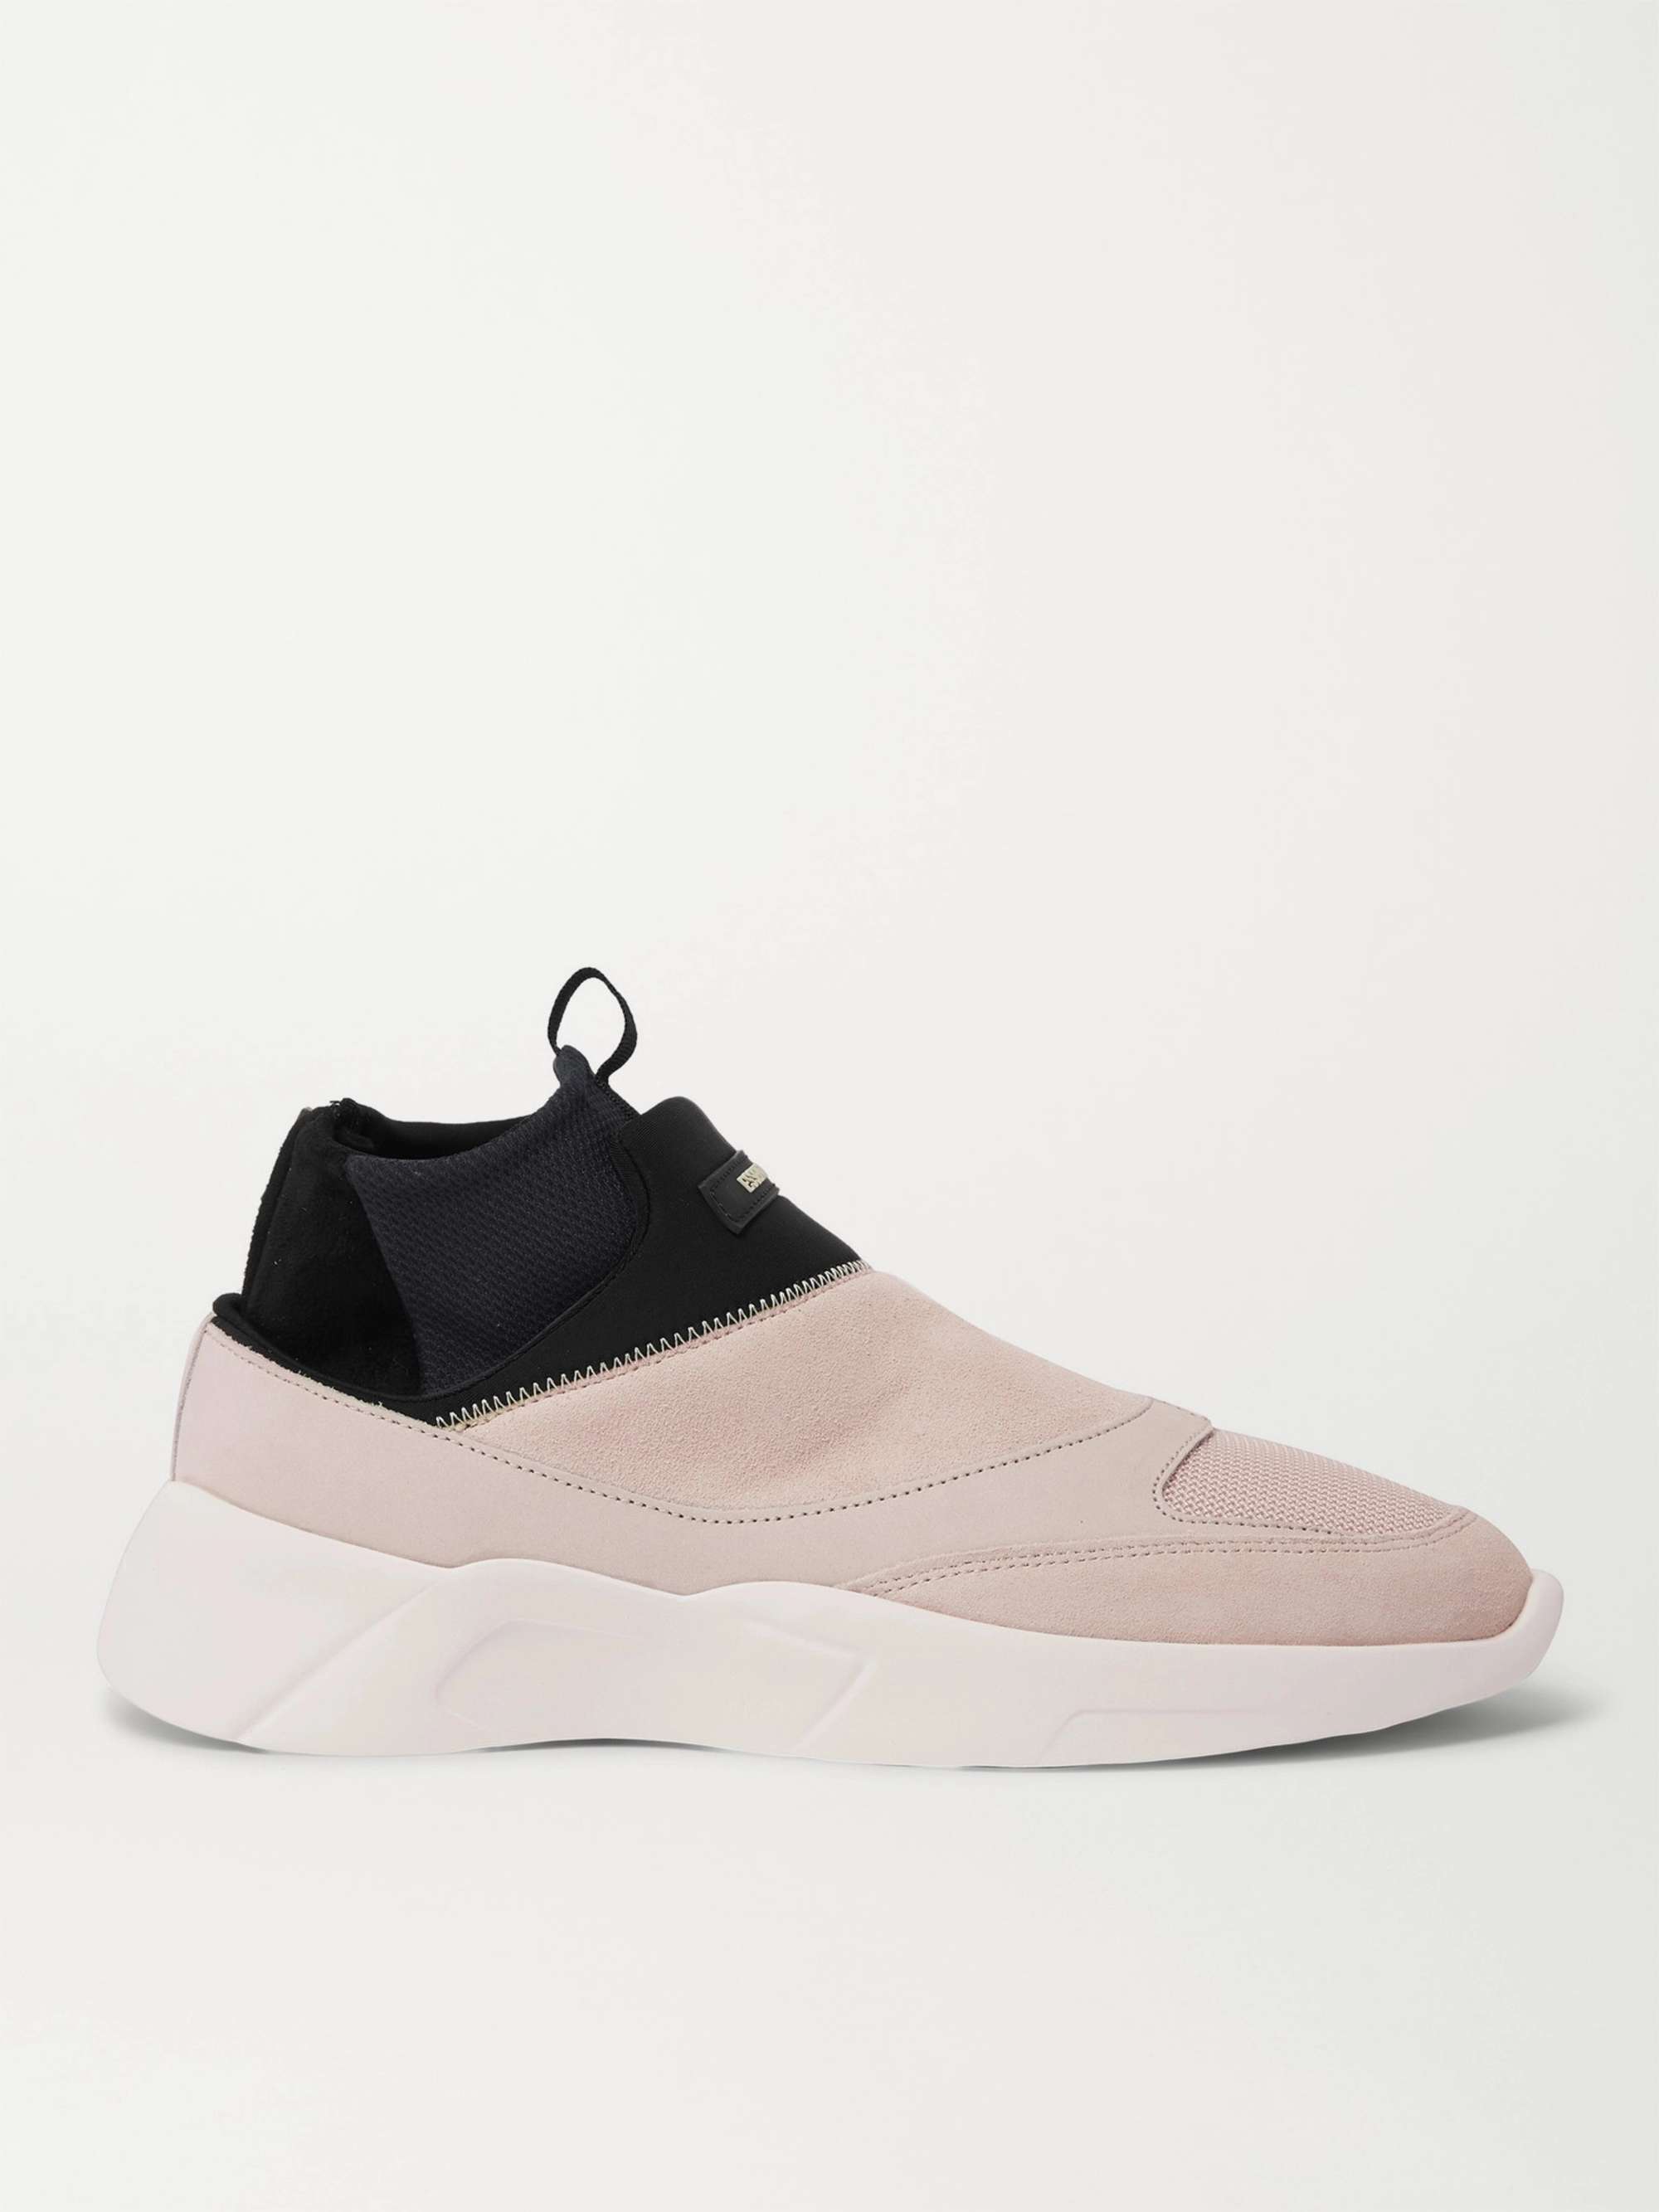 FEAR OF GOD ESSENTIALS Suede, Mesh and Neoprene Sneakers | MR PORTER